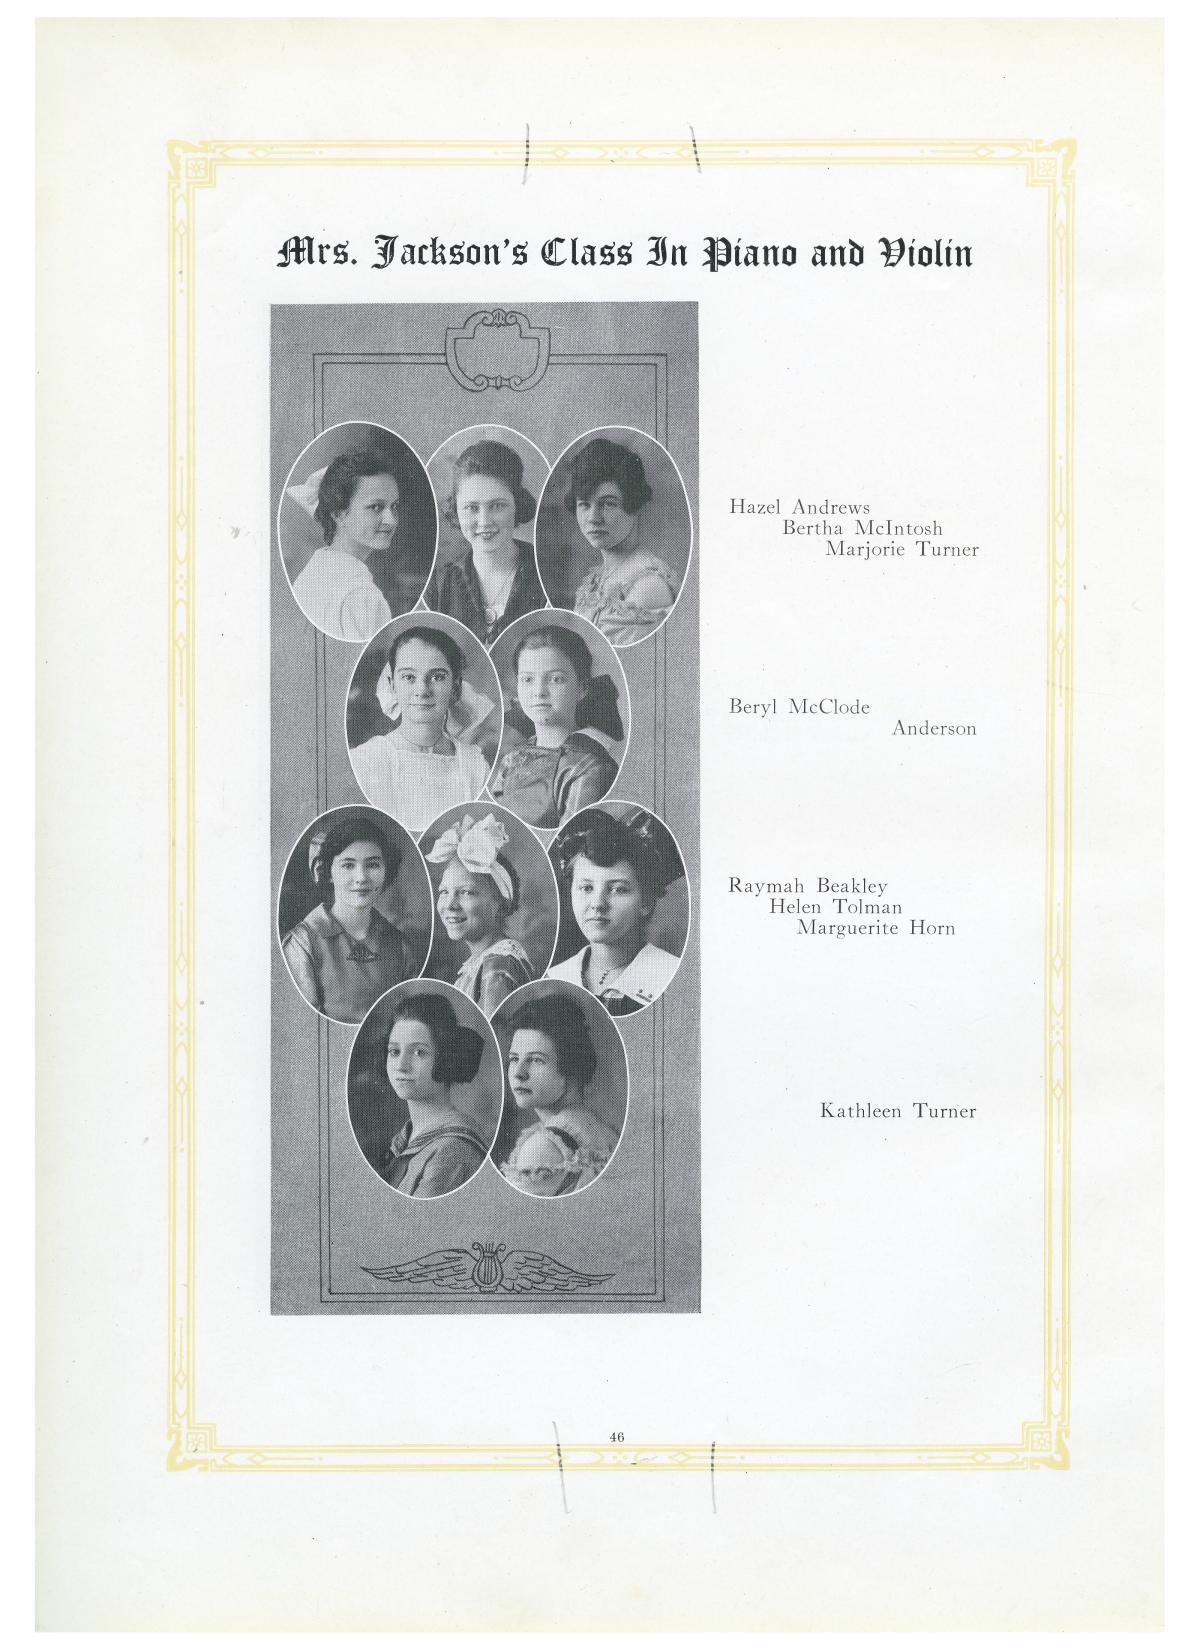 The Lasso, Yearbook of Howard Payne College, 1919
                                                
                                                    46
                                                